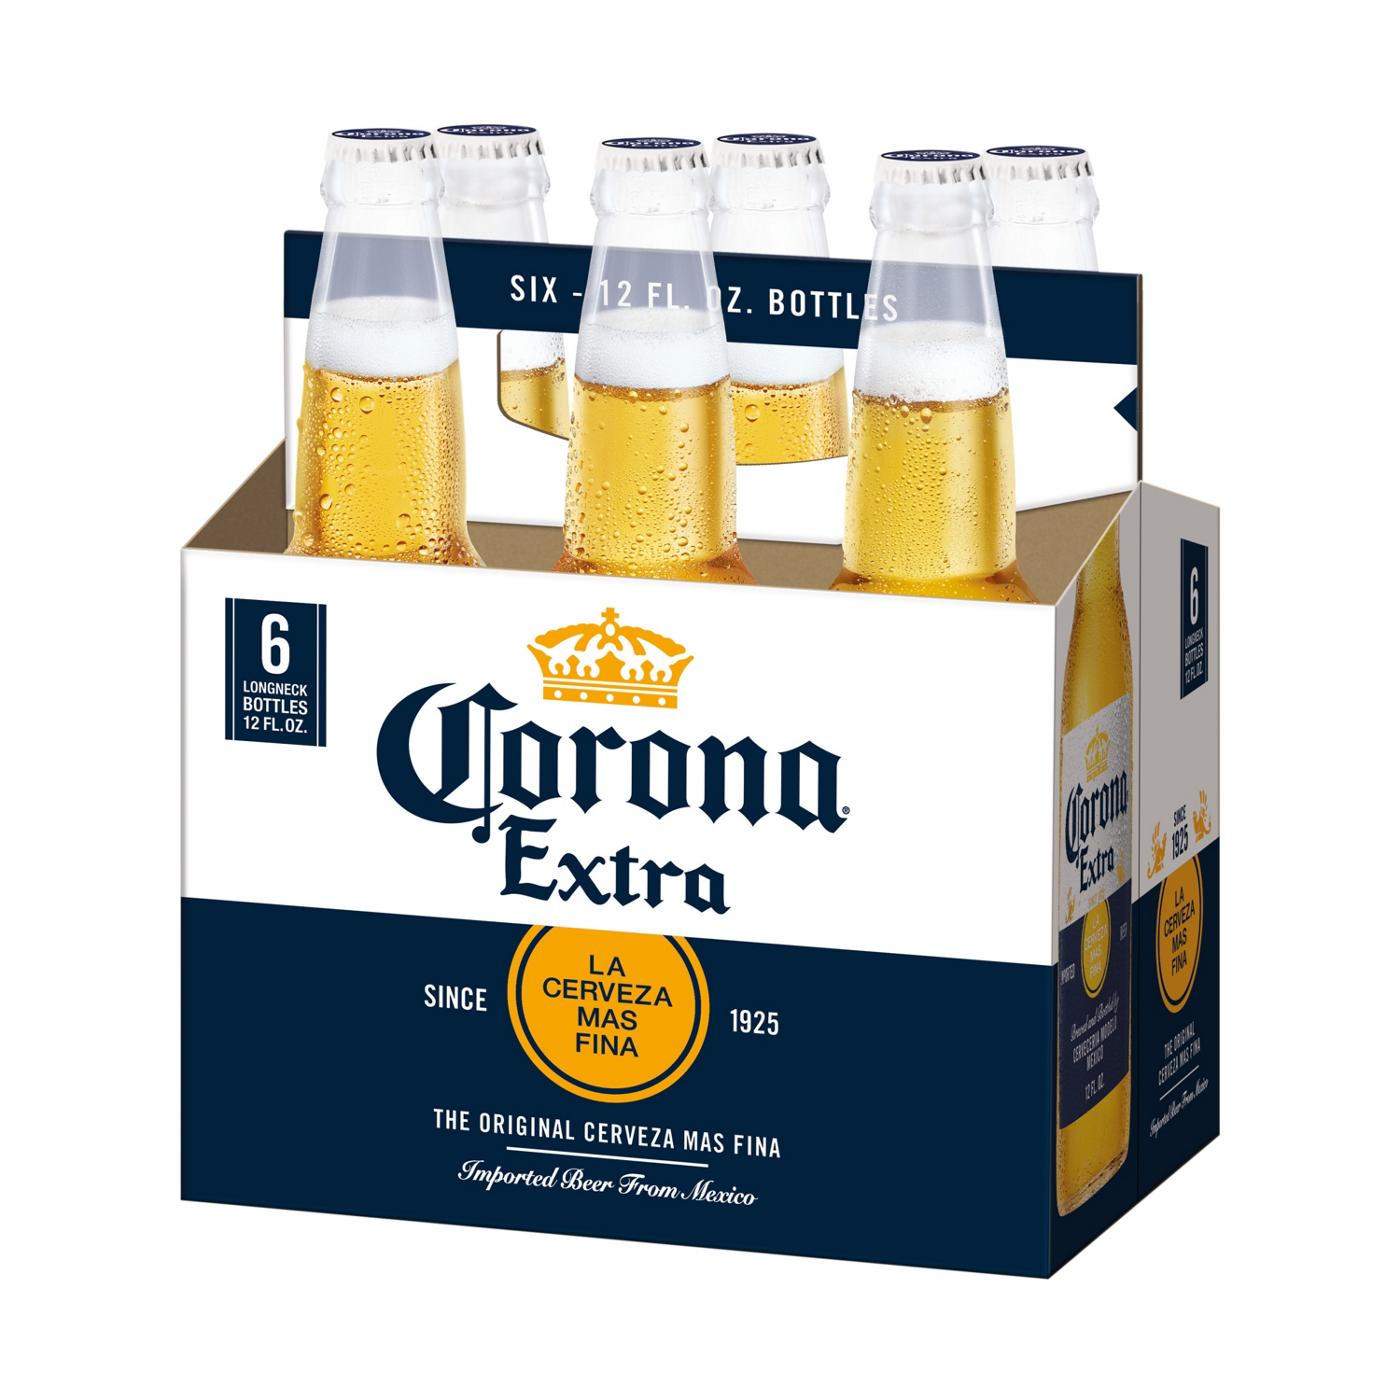 Corona Extra Mexican Lager Import Beer 12 oz Bottles, 6 pk; image 6 of 10